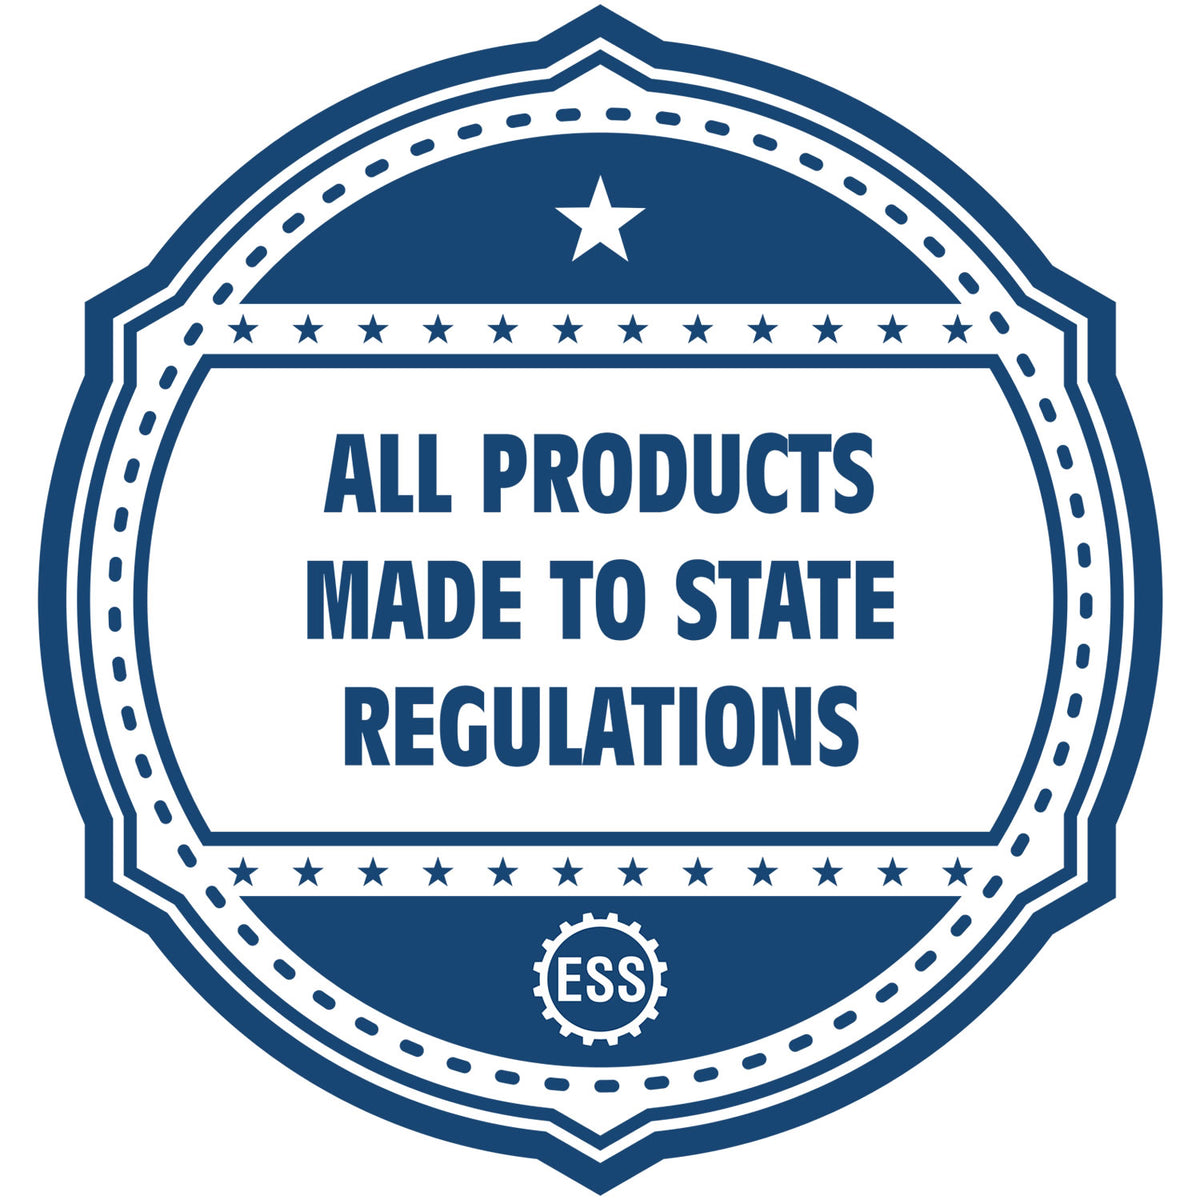 An icon or badge element for the Nevada Engineer Desk Seal showing that this product is made in compliance with state regulations.